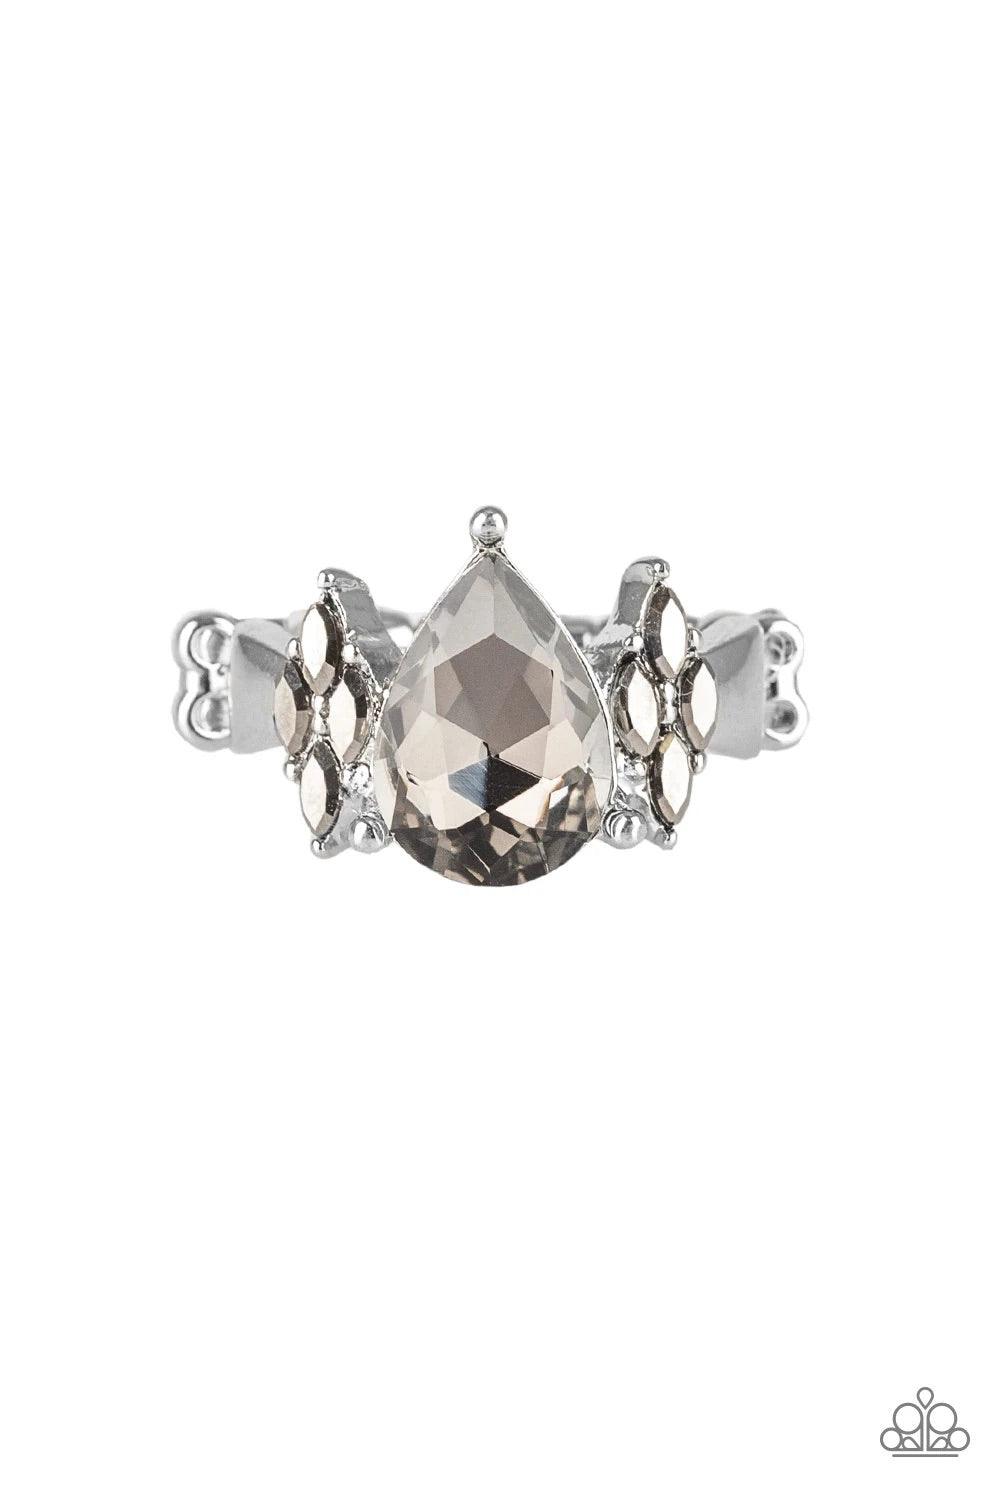 Paparazzi Accessories Yas Queen - Silver A dramatic golden teardrop gem is pressed into the center of a dainty gold band. Featuring regal marquise-cuts, dainty golden rhinestones flank the sparkling teardrop center for a glamorous finish. Features a daint